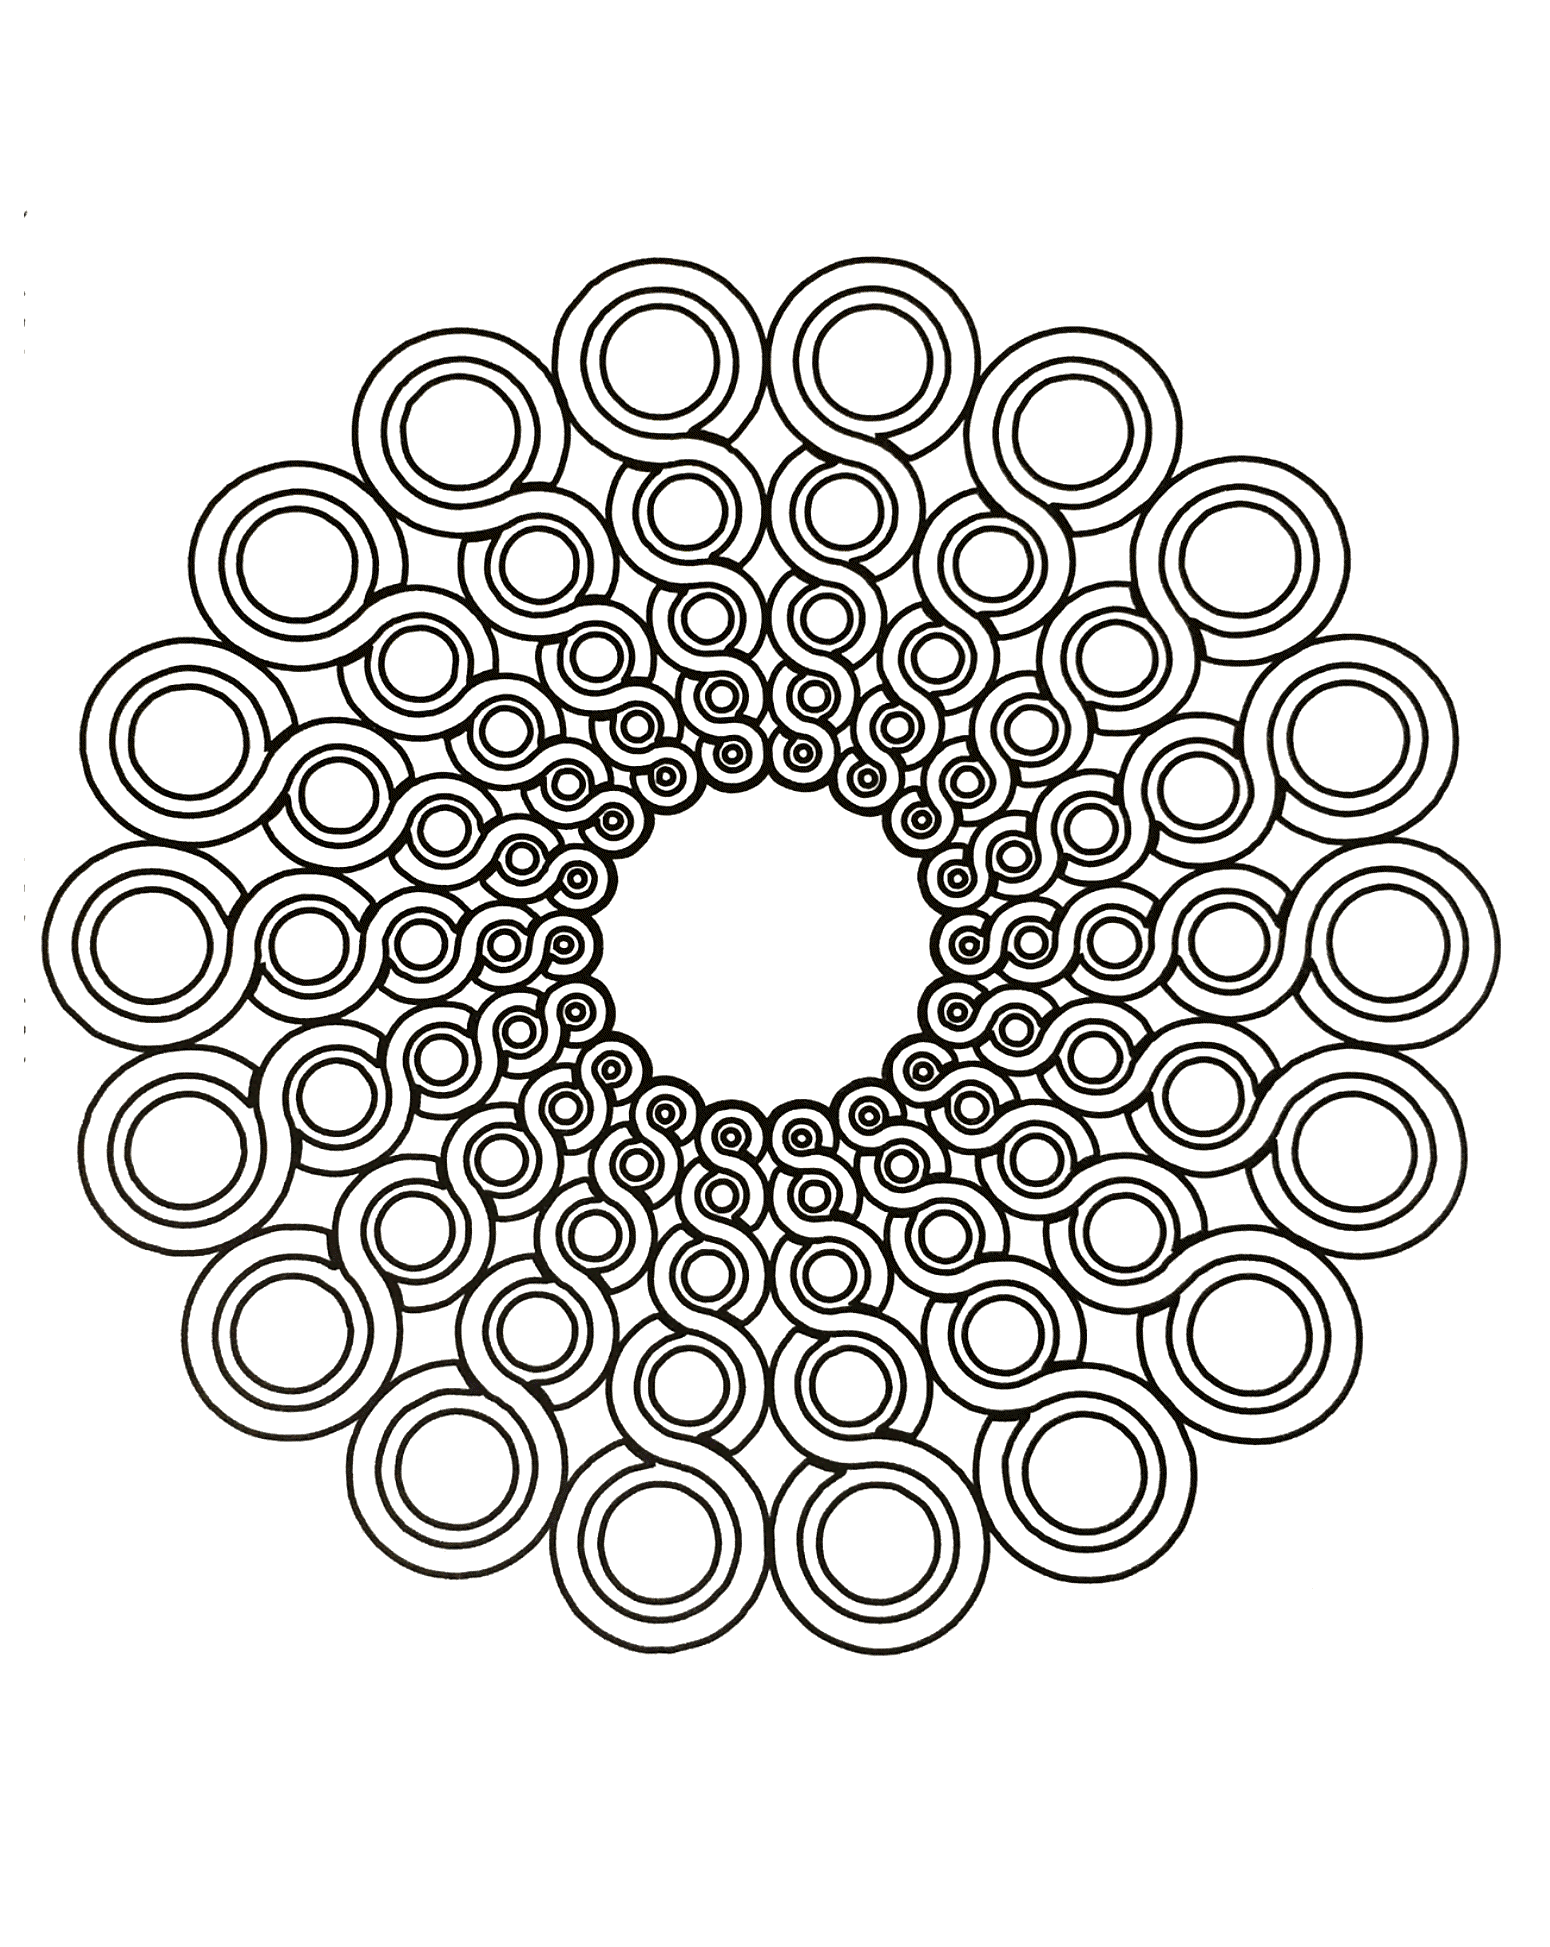 Simple Mandalas coloring page to print and color for free